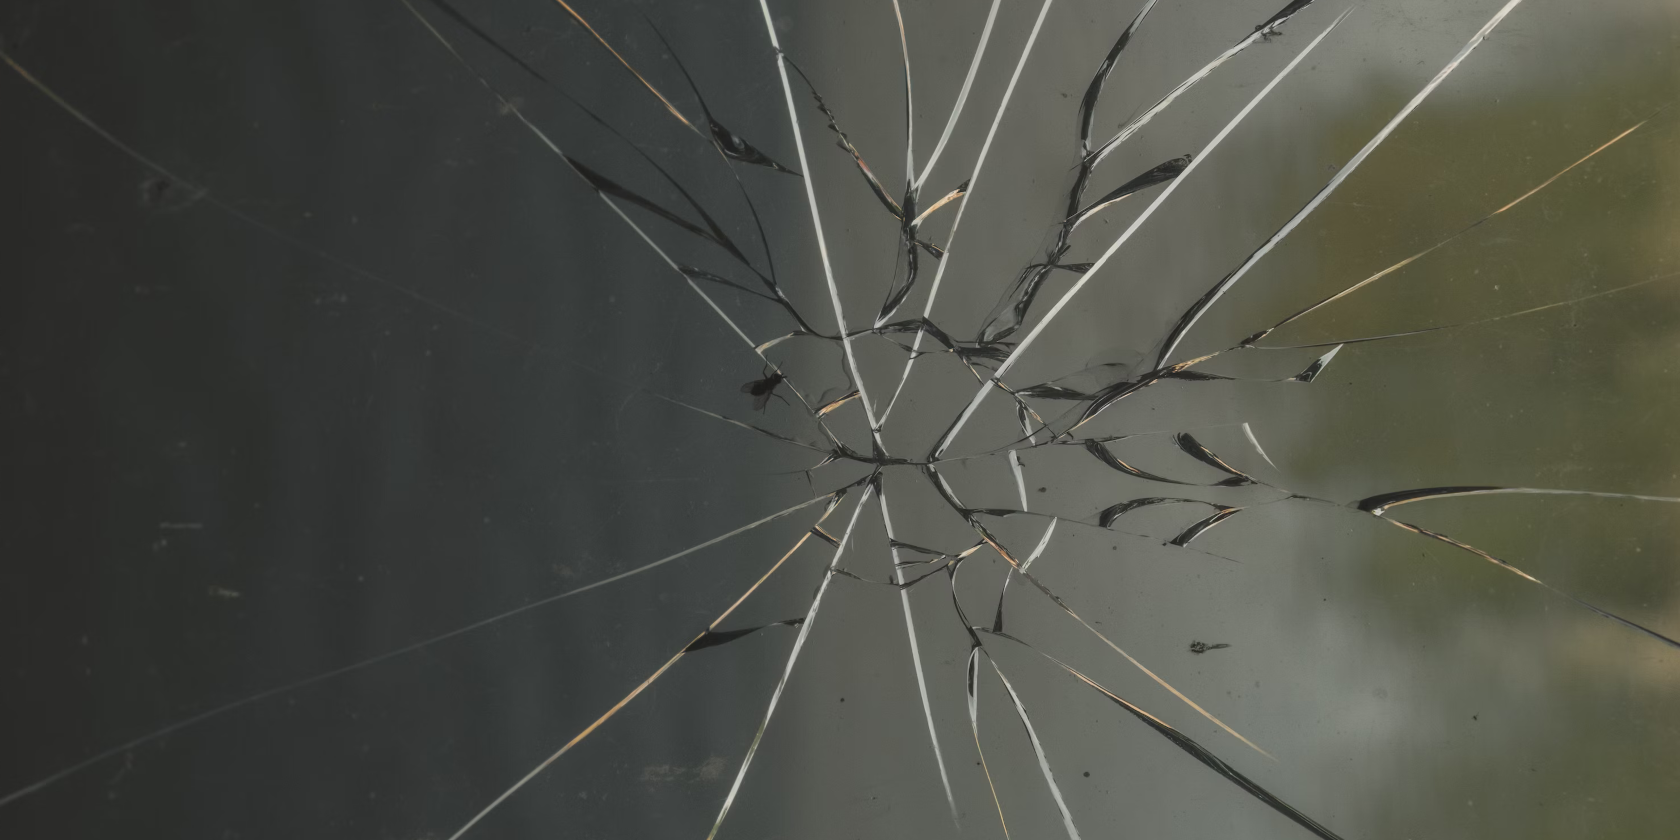 A pane of glass smashed as if hit by a single stone